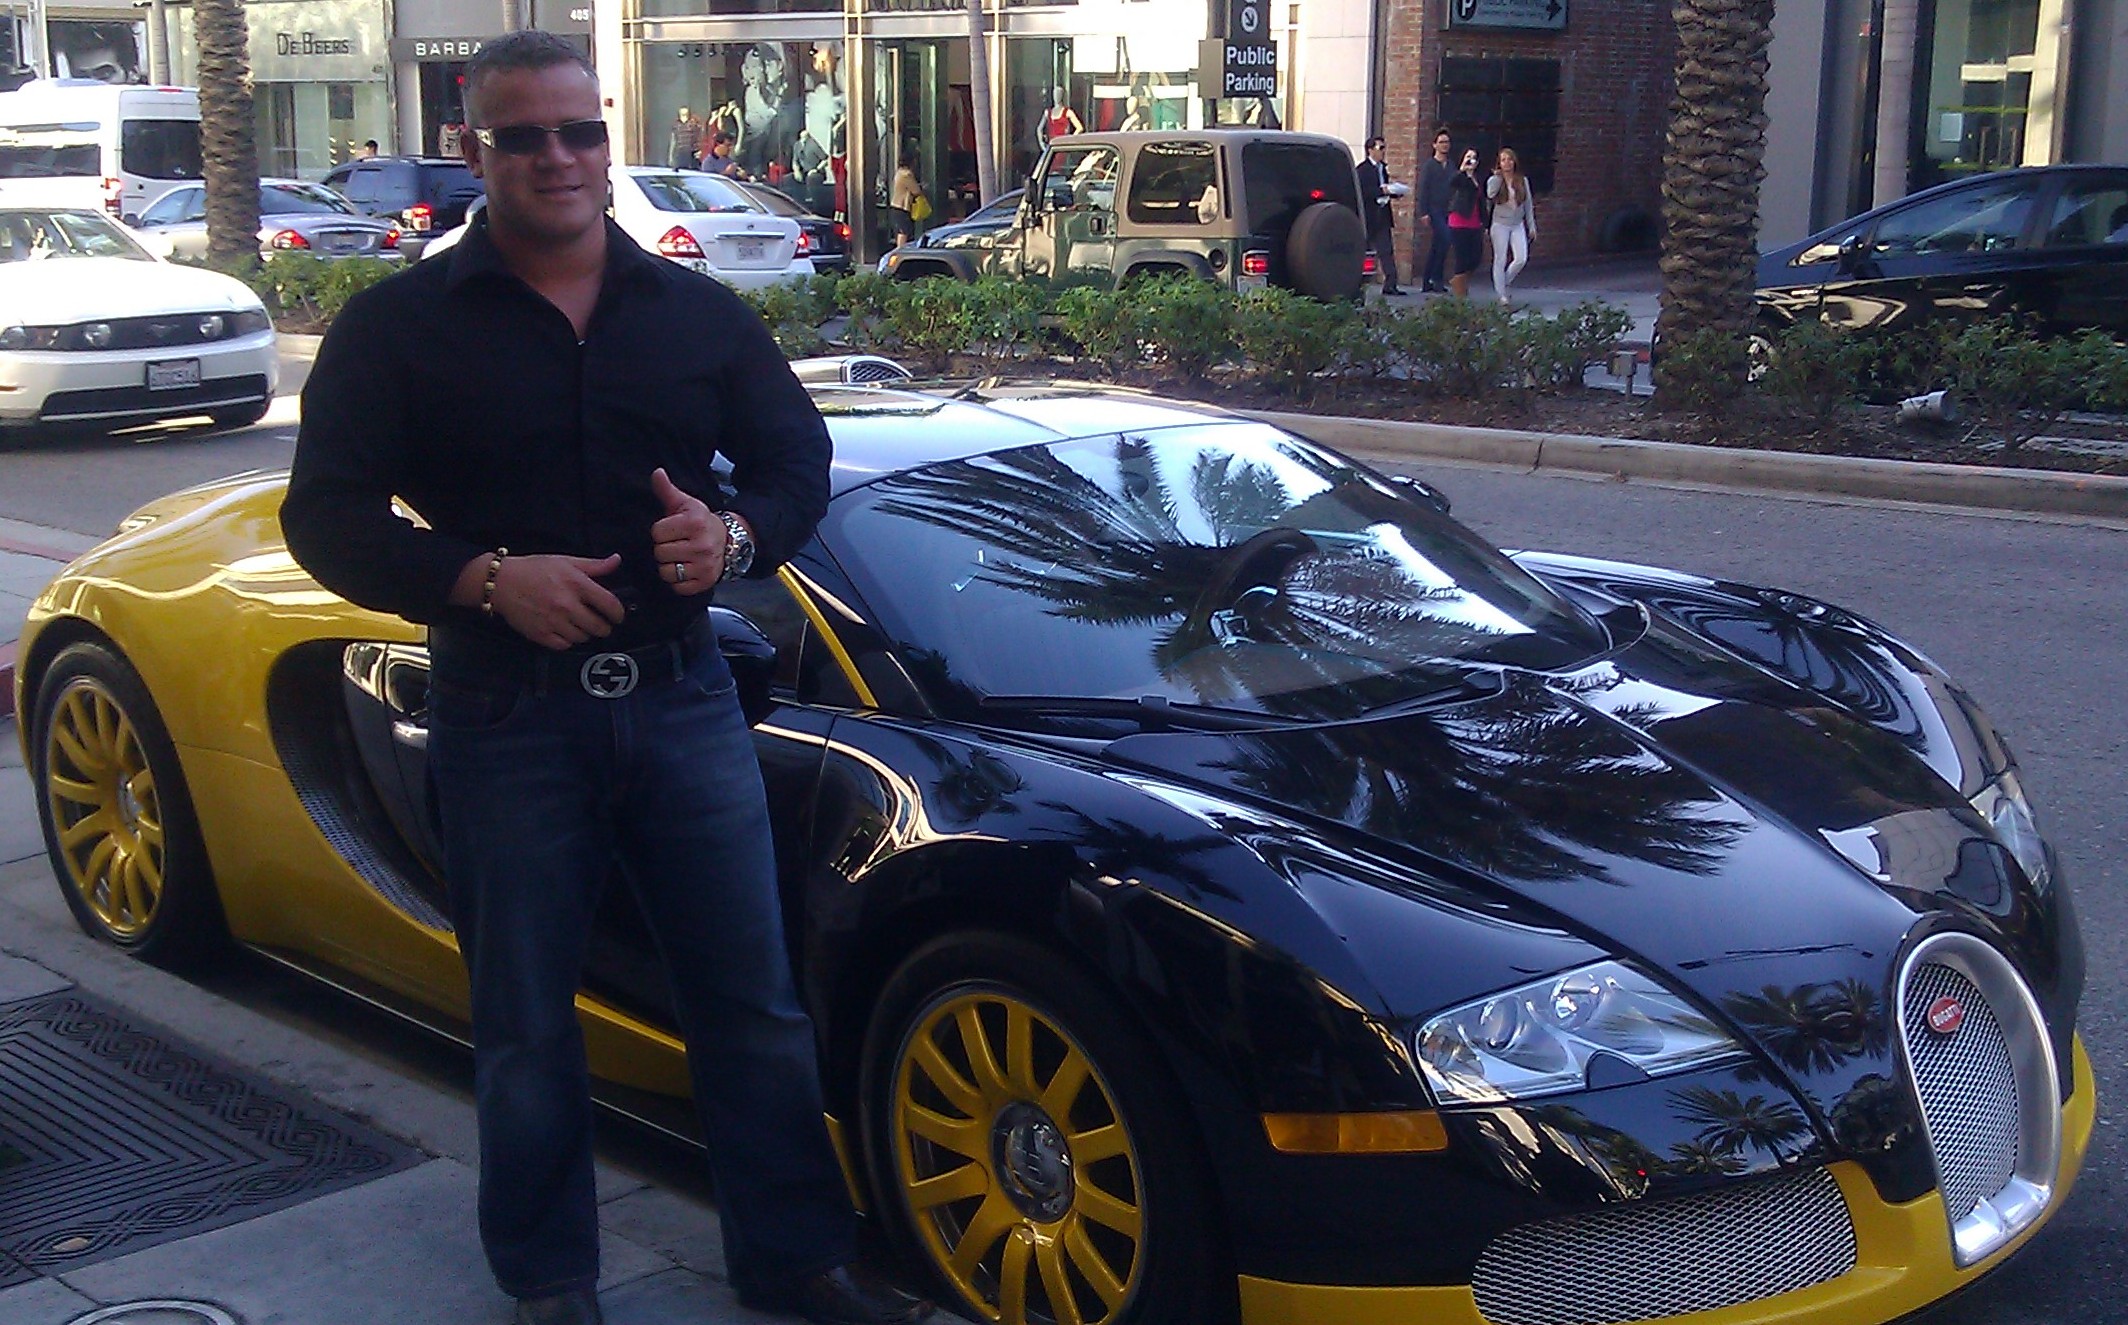 Zoltan Kovacs Producer / Actor at Rodeo Drive in Beverly Hills